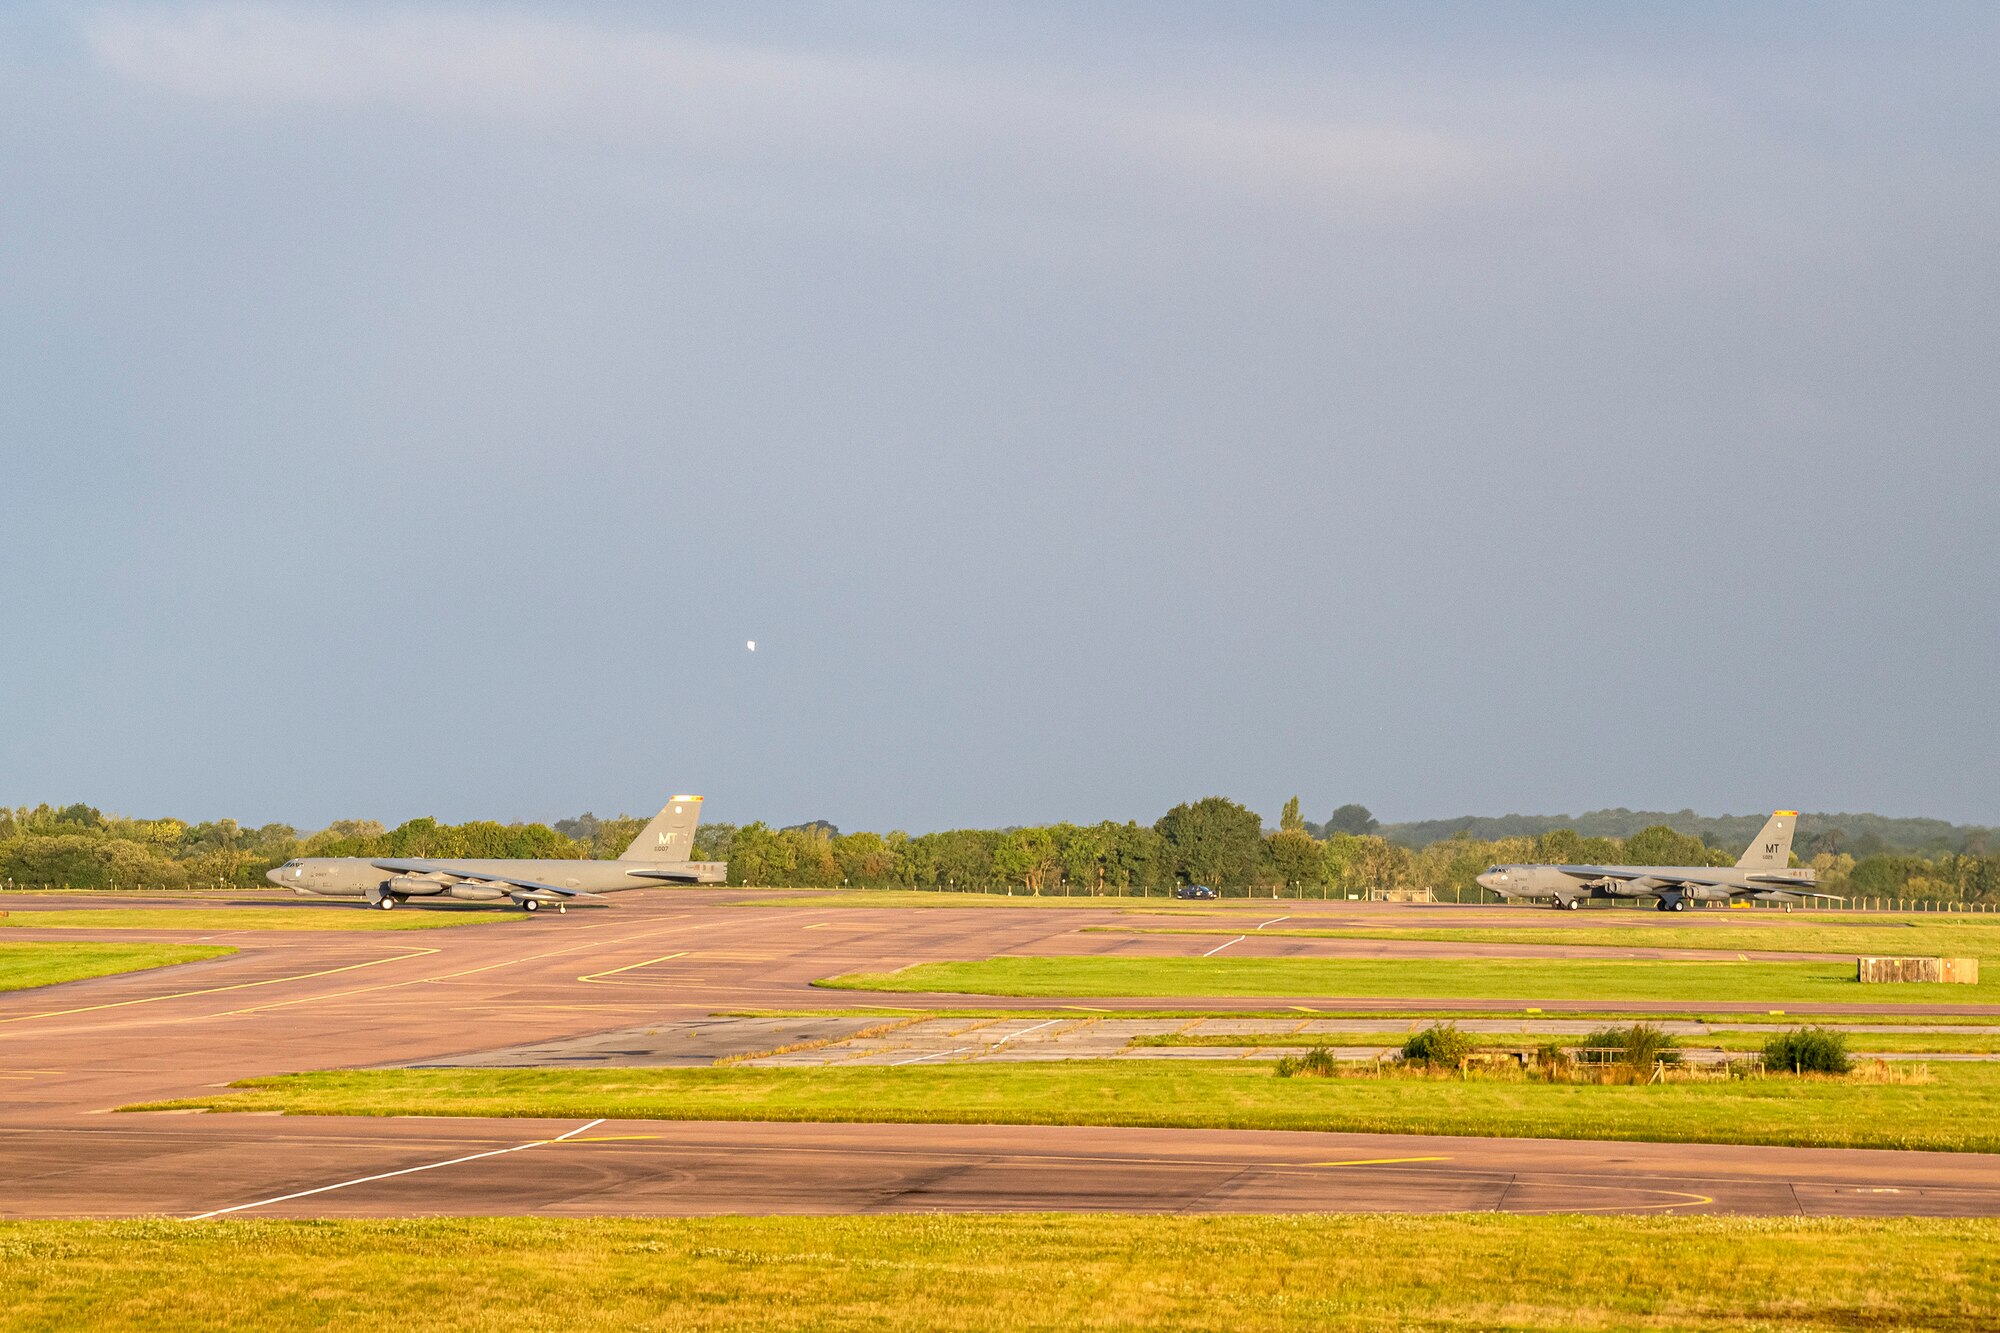 Two B-52 Stratofortressess taxi on the runway at RAF Fairford, England, Aug. 22, 2020. The Department of Defense maintains command and control of its bomber force for any mission, anywhere in the world at any time. (U.S. Air Force photo by Senior Airman Eugene Oliver)